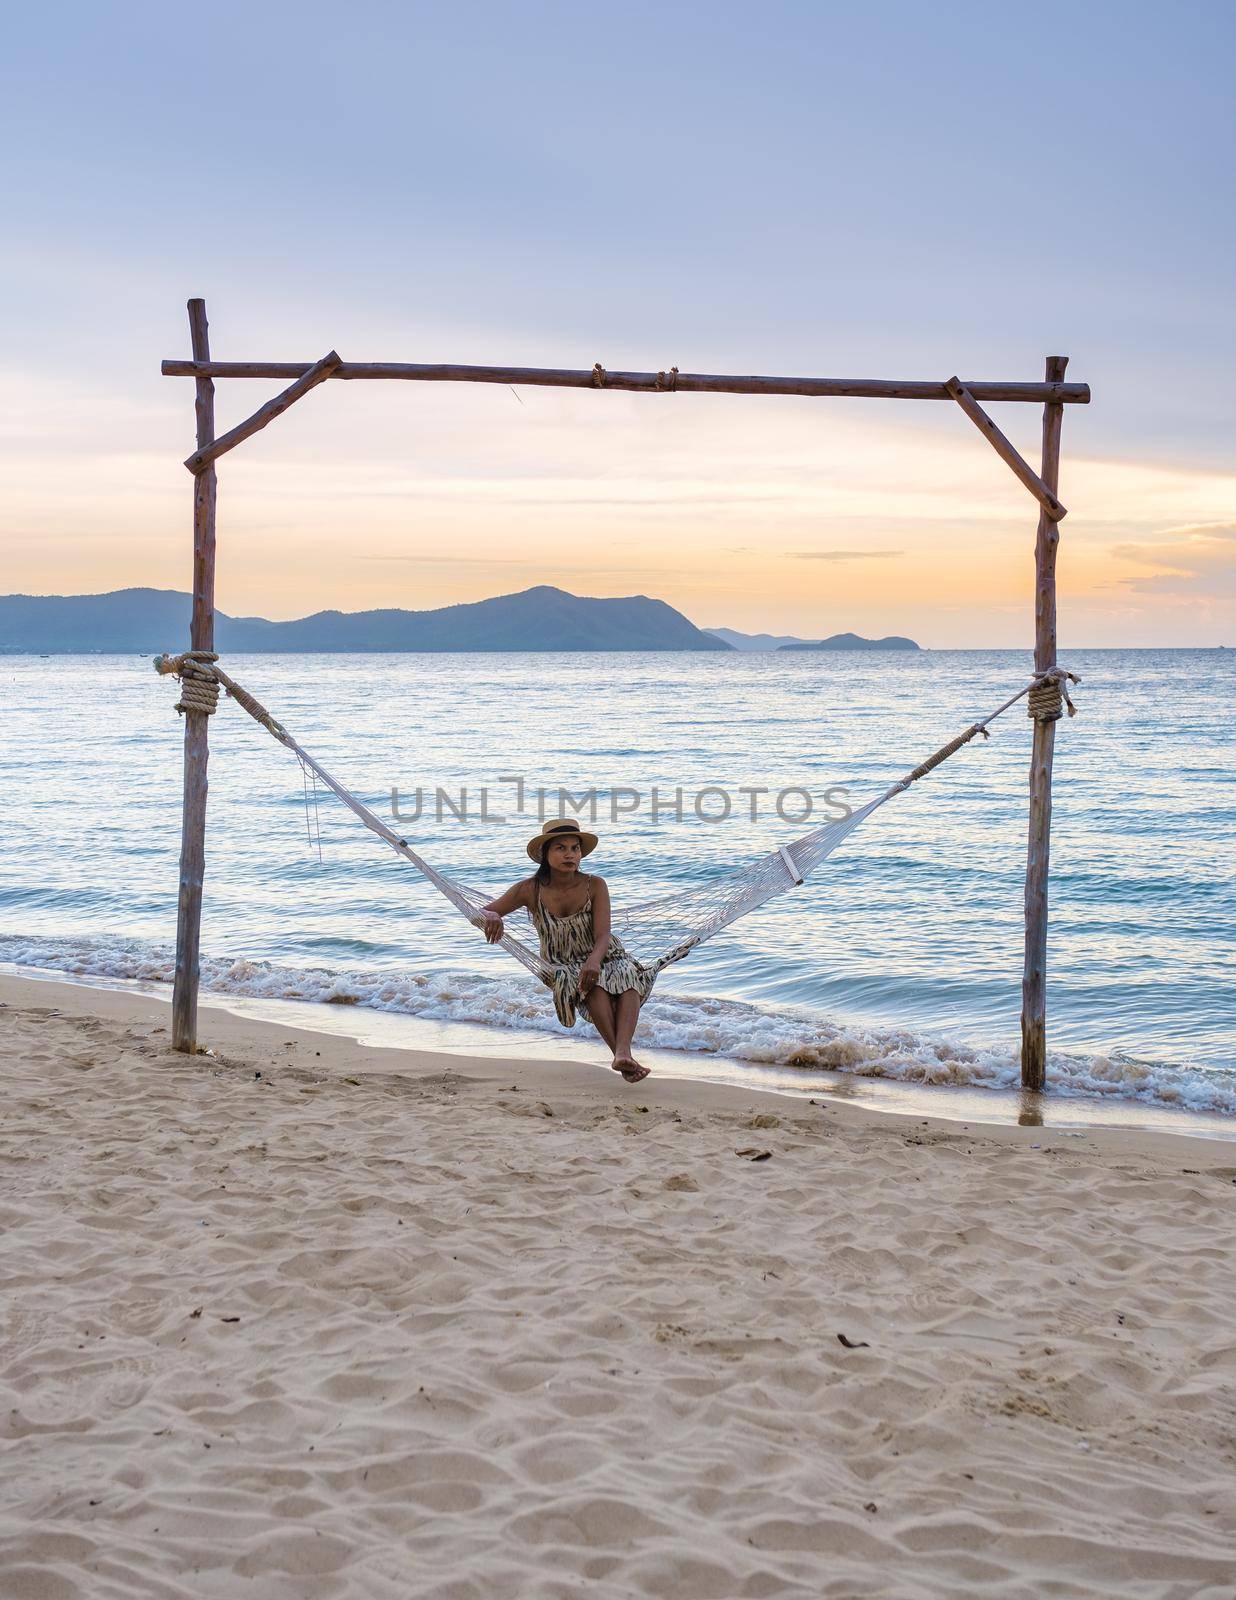 Men and women watching the sunset in a hammock on the Pattaya beach during sunset in Thailand Ban Amphur beach. couple walking on a tropical beach with palm tree and hammock during sunset